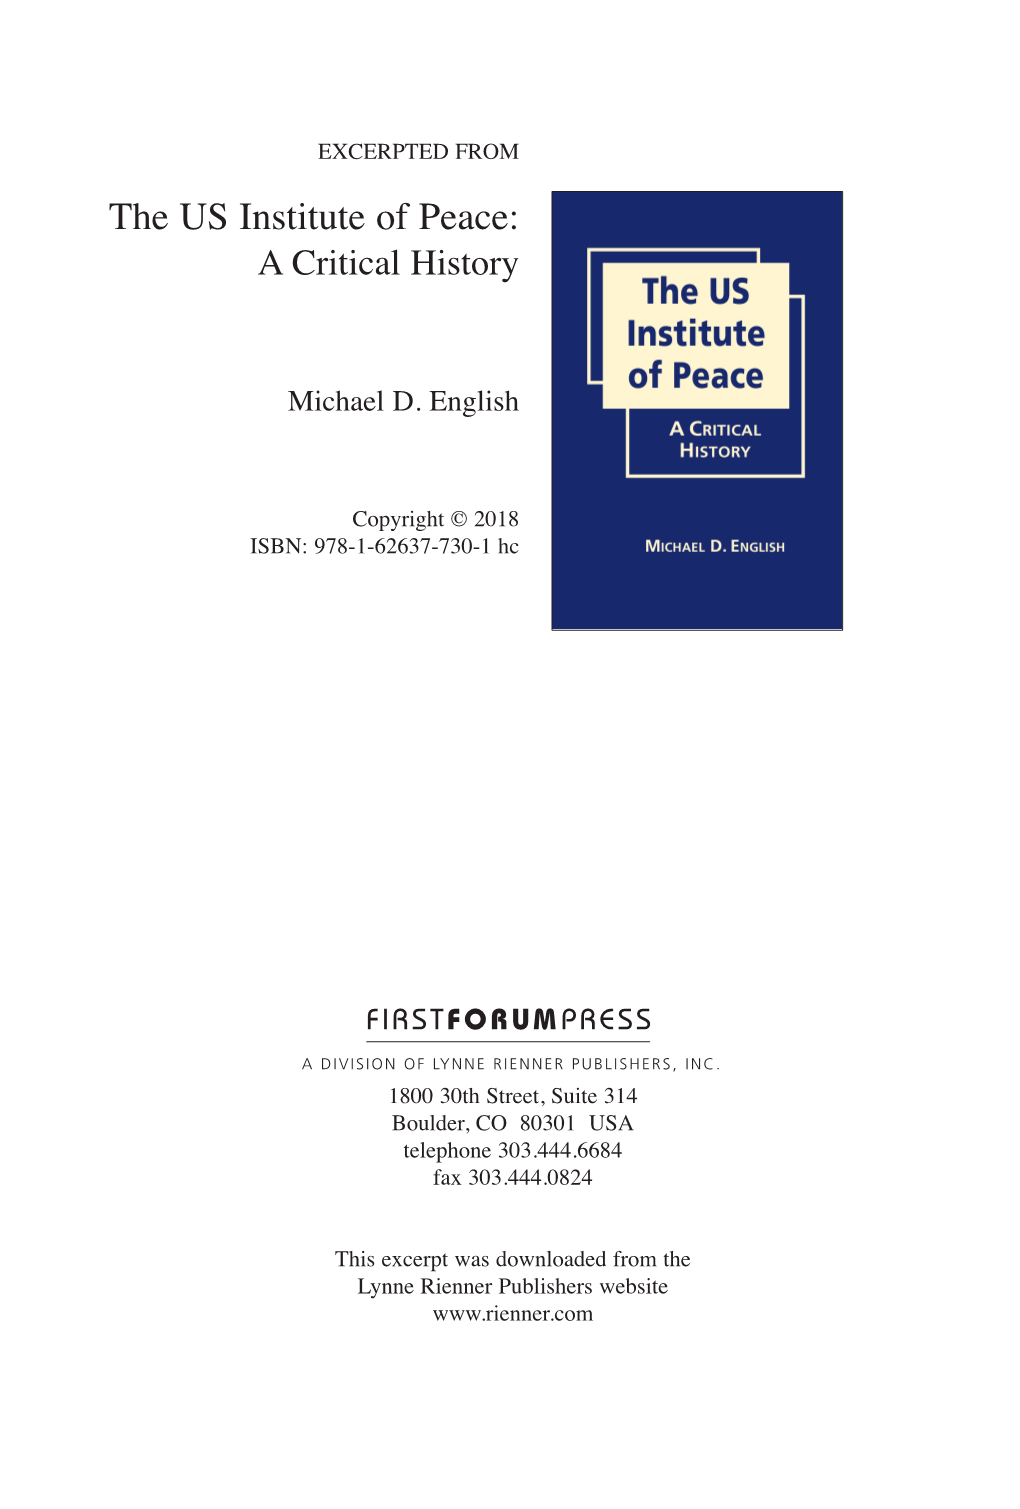 The US Institute of Peace: a Critical History